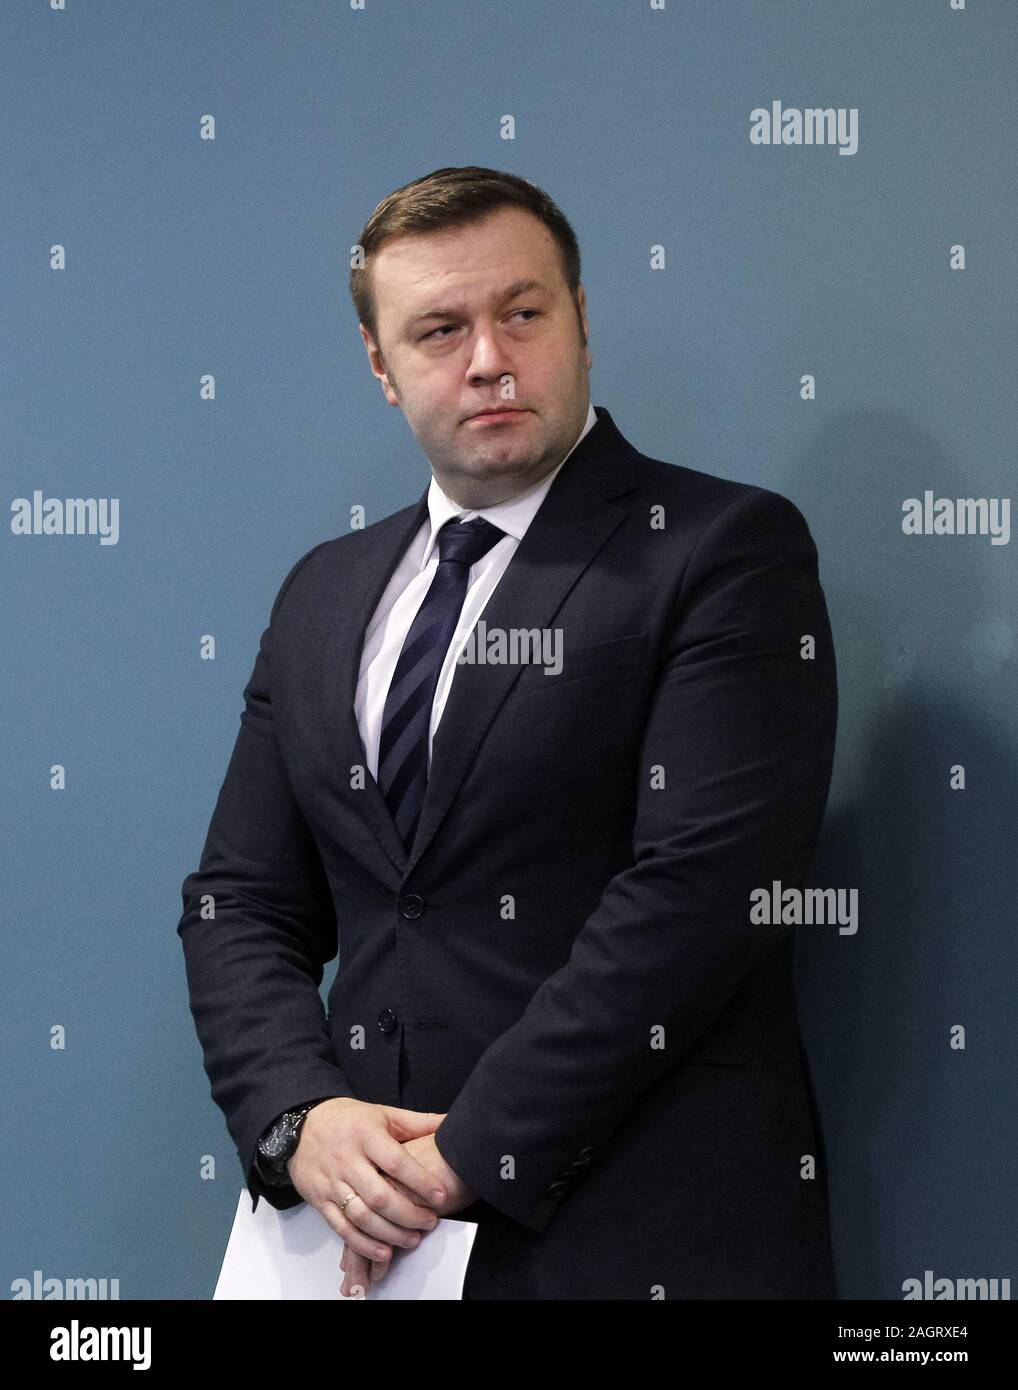 December 21, 2019, Kiev, Ukraine: Ukrainian Minister of energy and environmental erotection OLEKSIY ORZHEL waits before a briefing with the Naftogaz of Ukraine Executive Director YURIY VITRENKO (not seen) in Kiev, Ukraine, on 21 December 2019. As media reported, the EU, Ukraine and Russia reached a final agreement about Russian gas transit via Ukraine to Europe. (Credit Image: © Serg Glovny/ZUMA Wire) Stock Photo